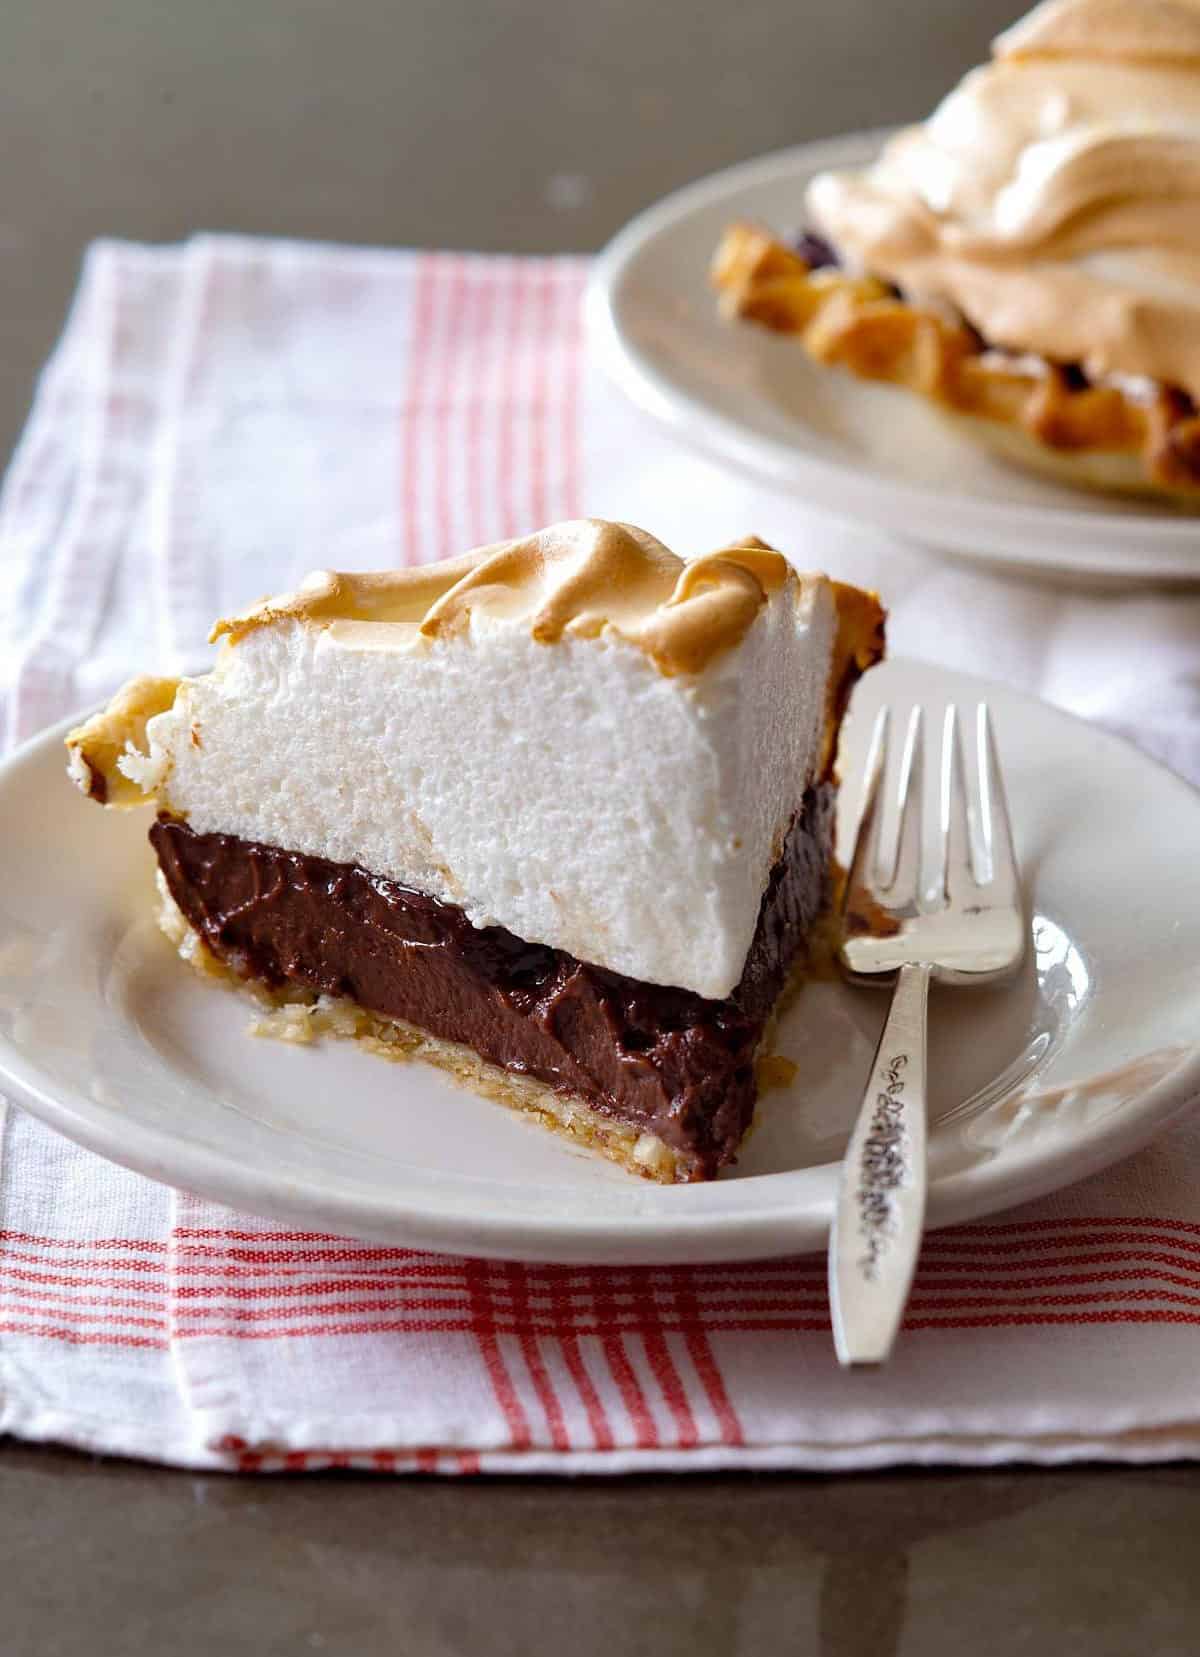  Fluffy and crispy meringue topping browned to perfection